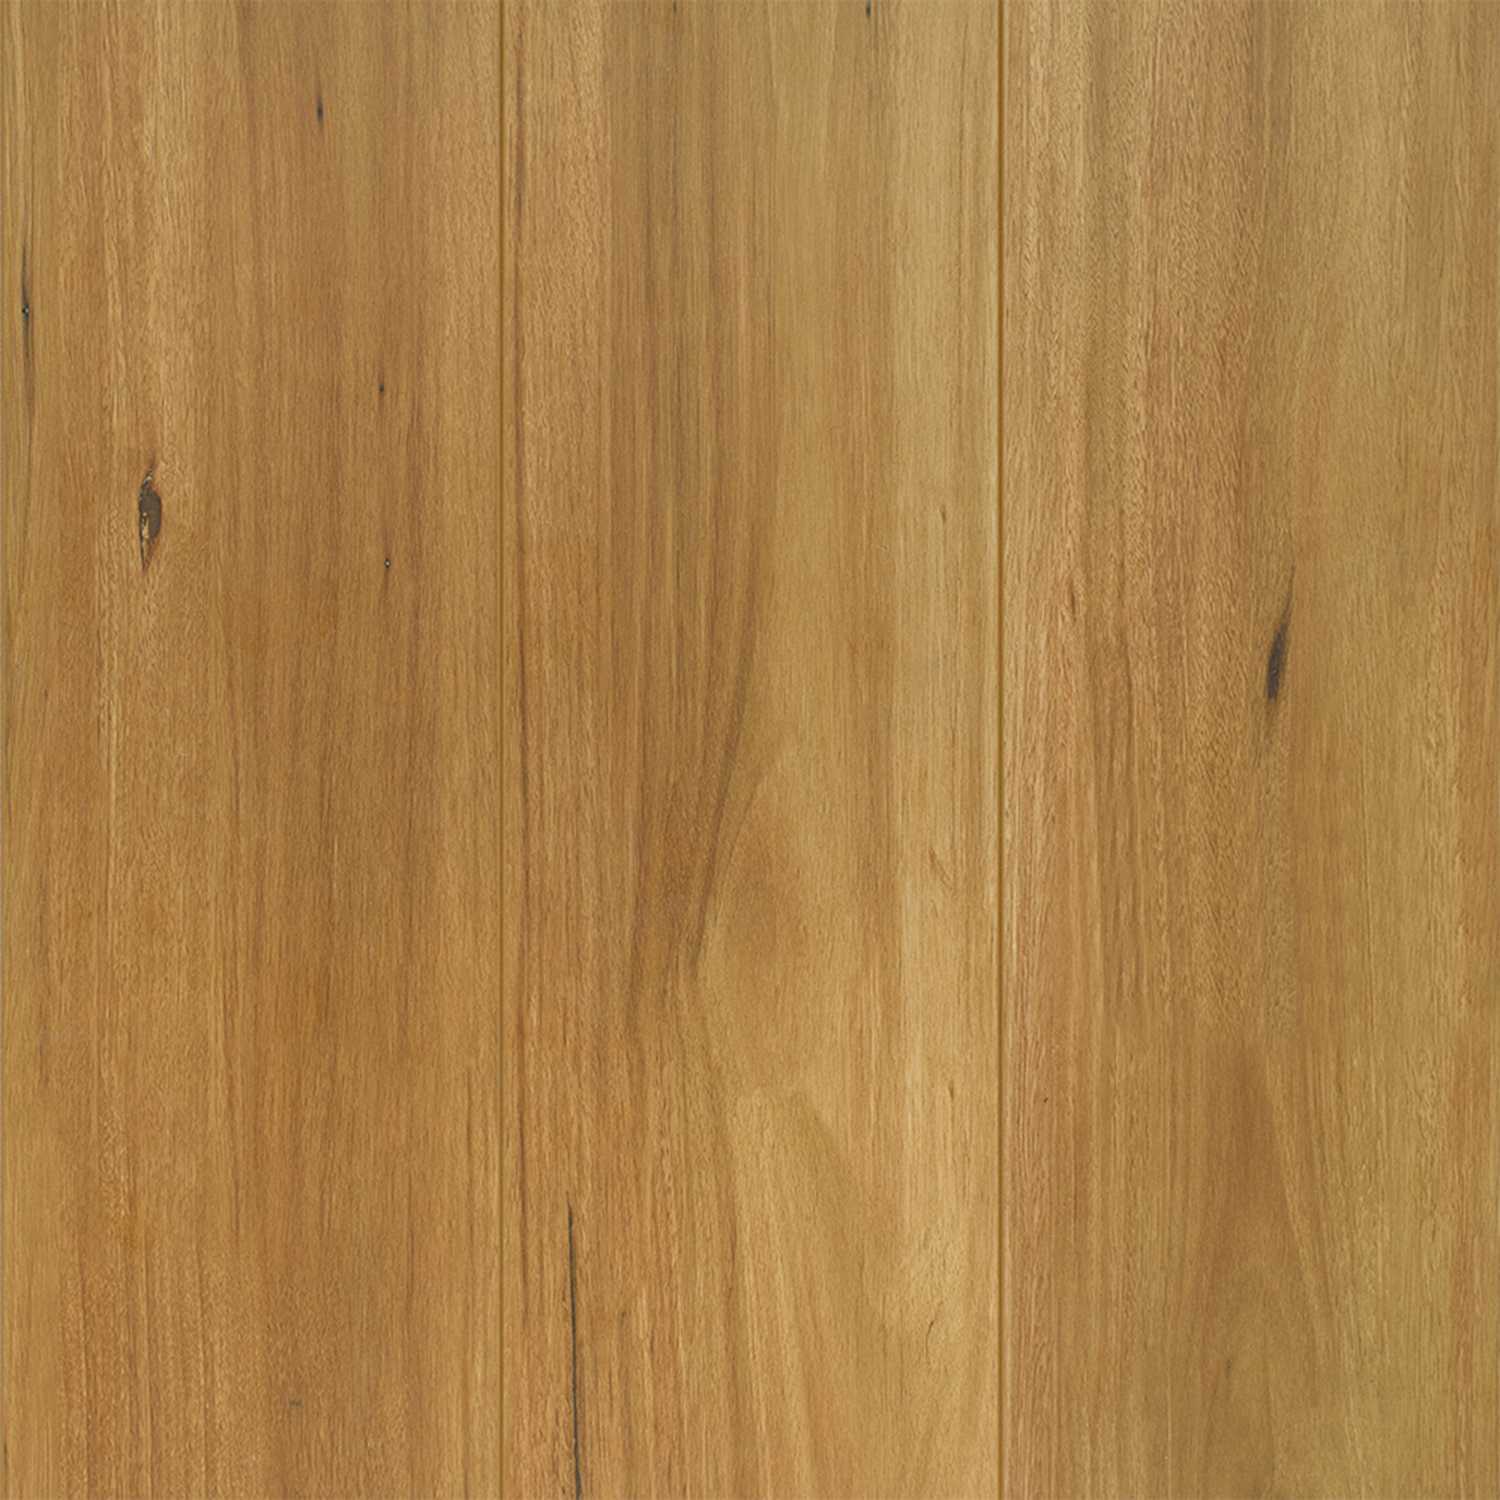 Lifestyle Spotted Gum Laminate Flooring Australian Select Timbers